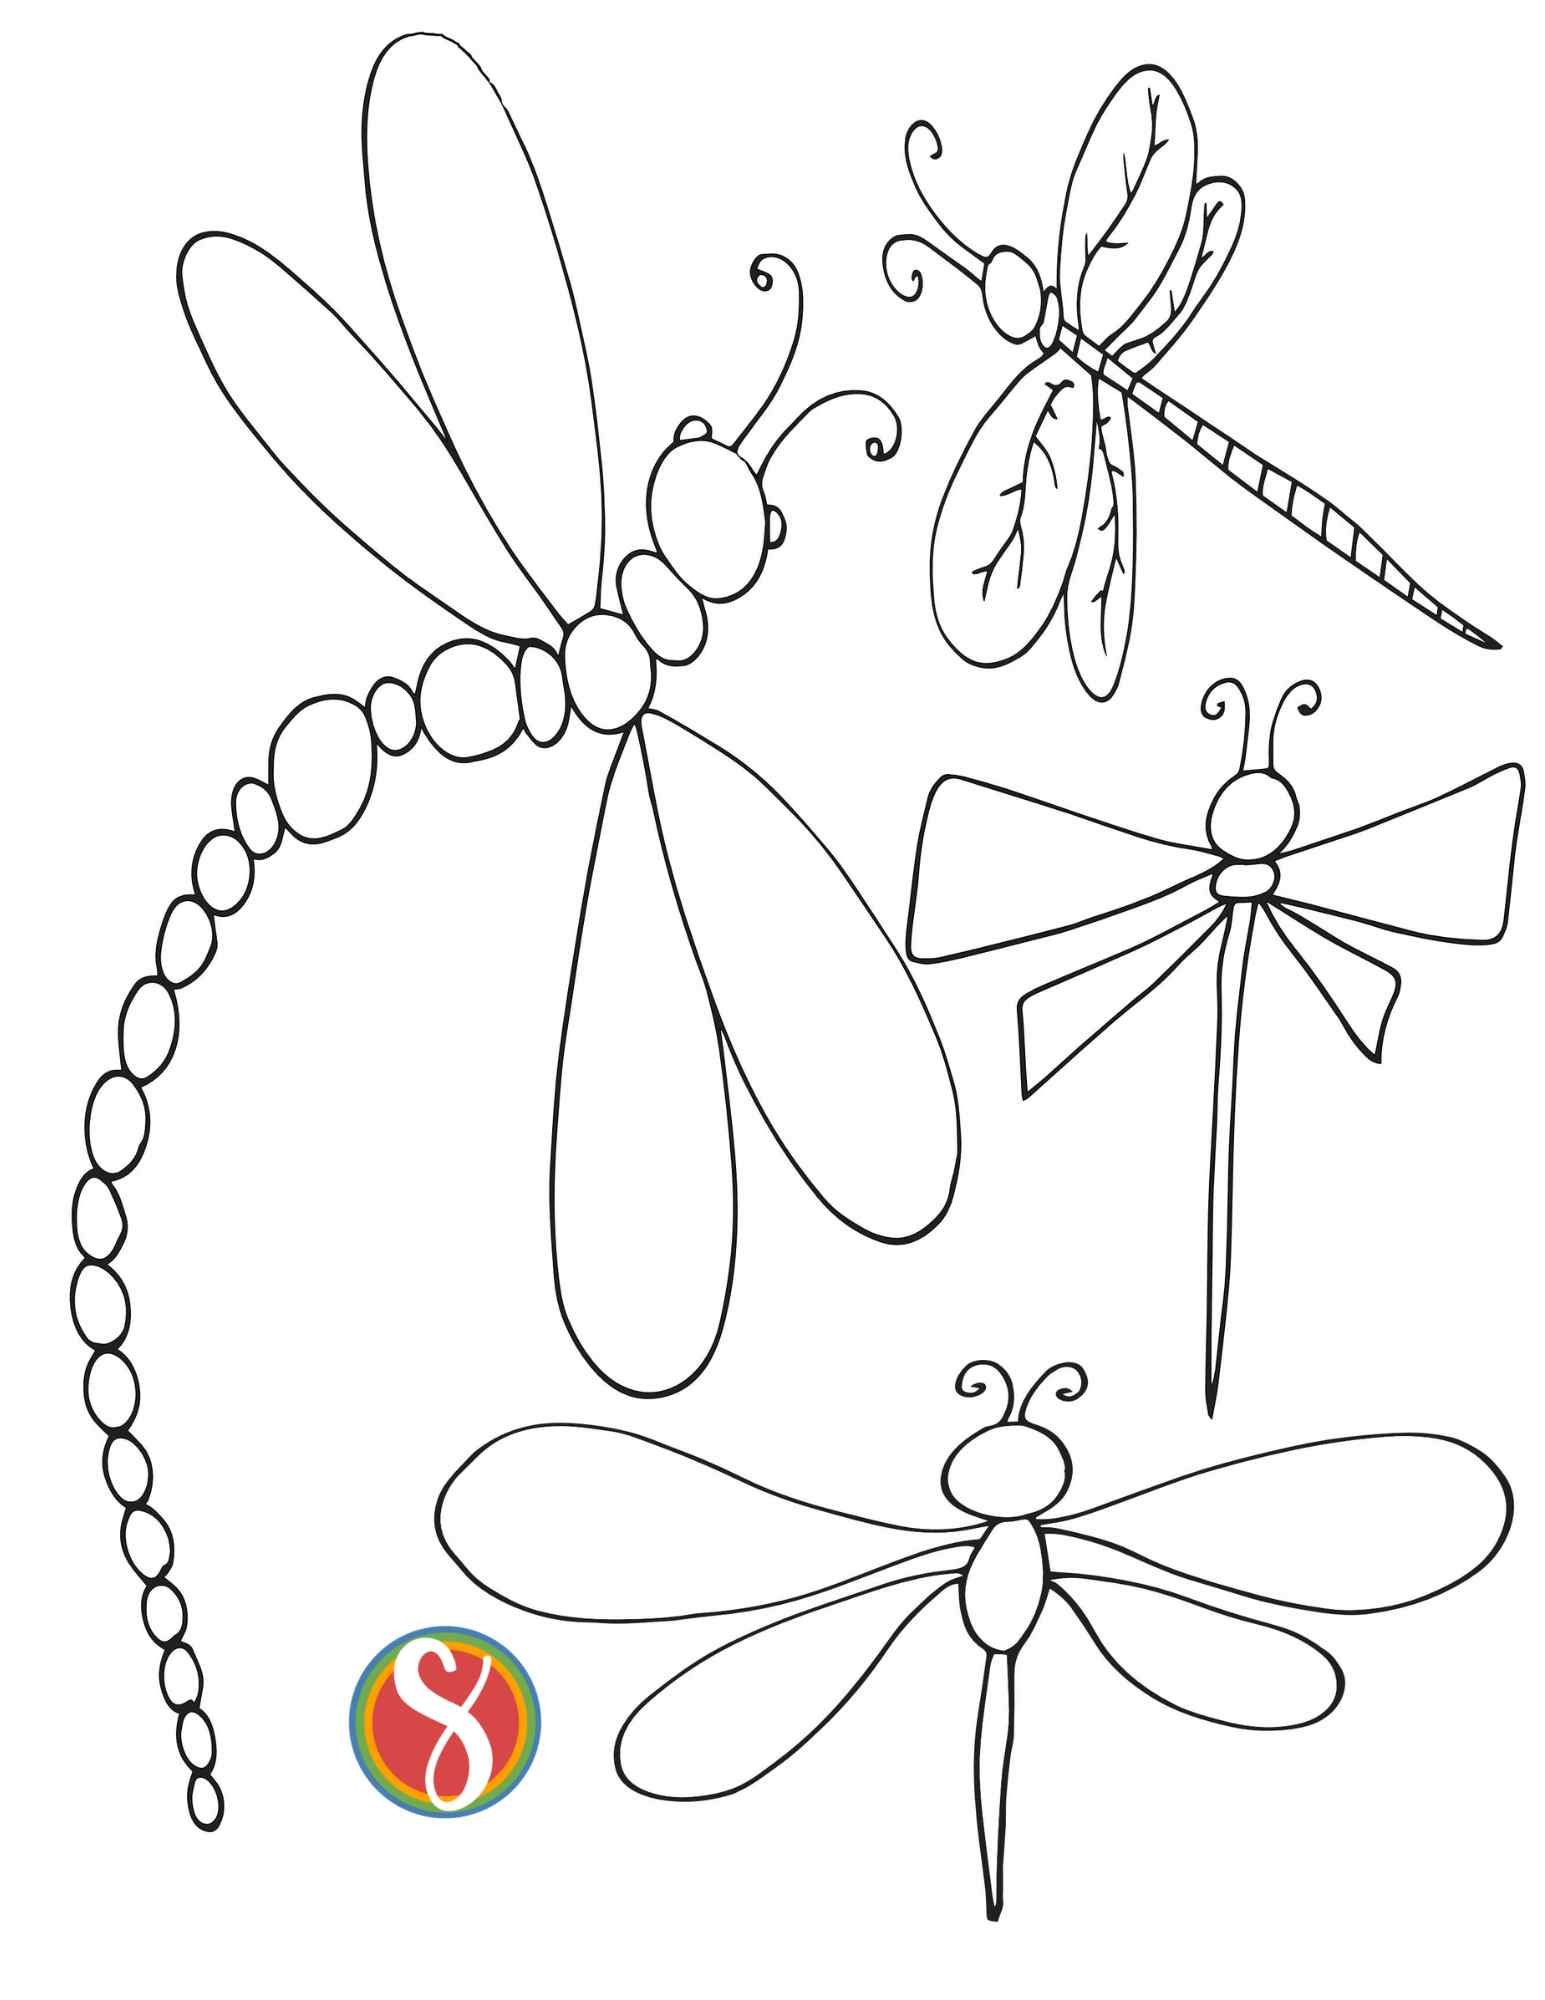 simple dragonfly coloring page, 4 outlines of dragonflies to color